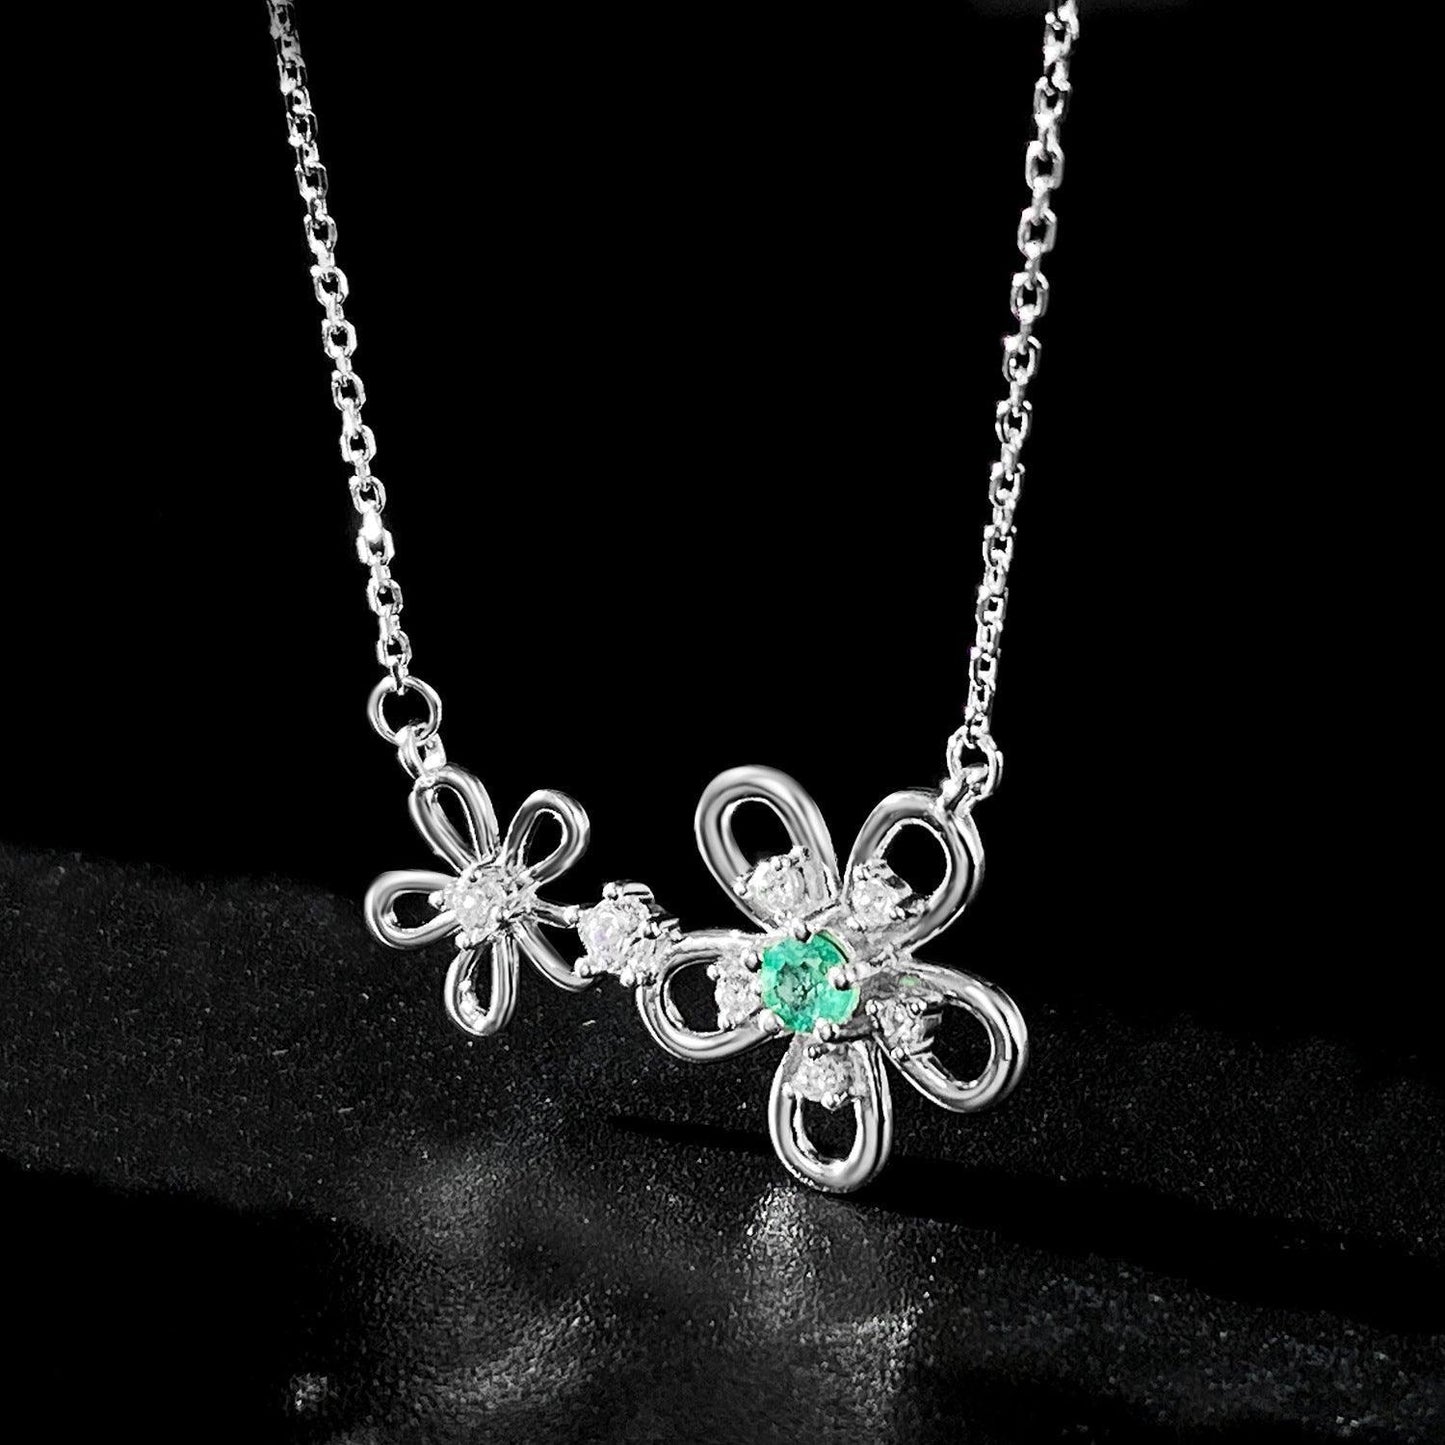 S925 Silver Girl's Versatile Collar Chain Emerald Necklace in 2023 | S925 Silver Girl's Versatile Collar Chain Emerald Necklace - undefined | Emerald Necklace, S925 silver fashion emerald necklace, S925 Silver necklace | From Hunny Life | hunnylife.com